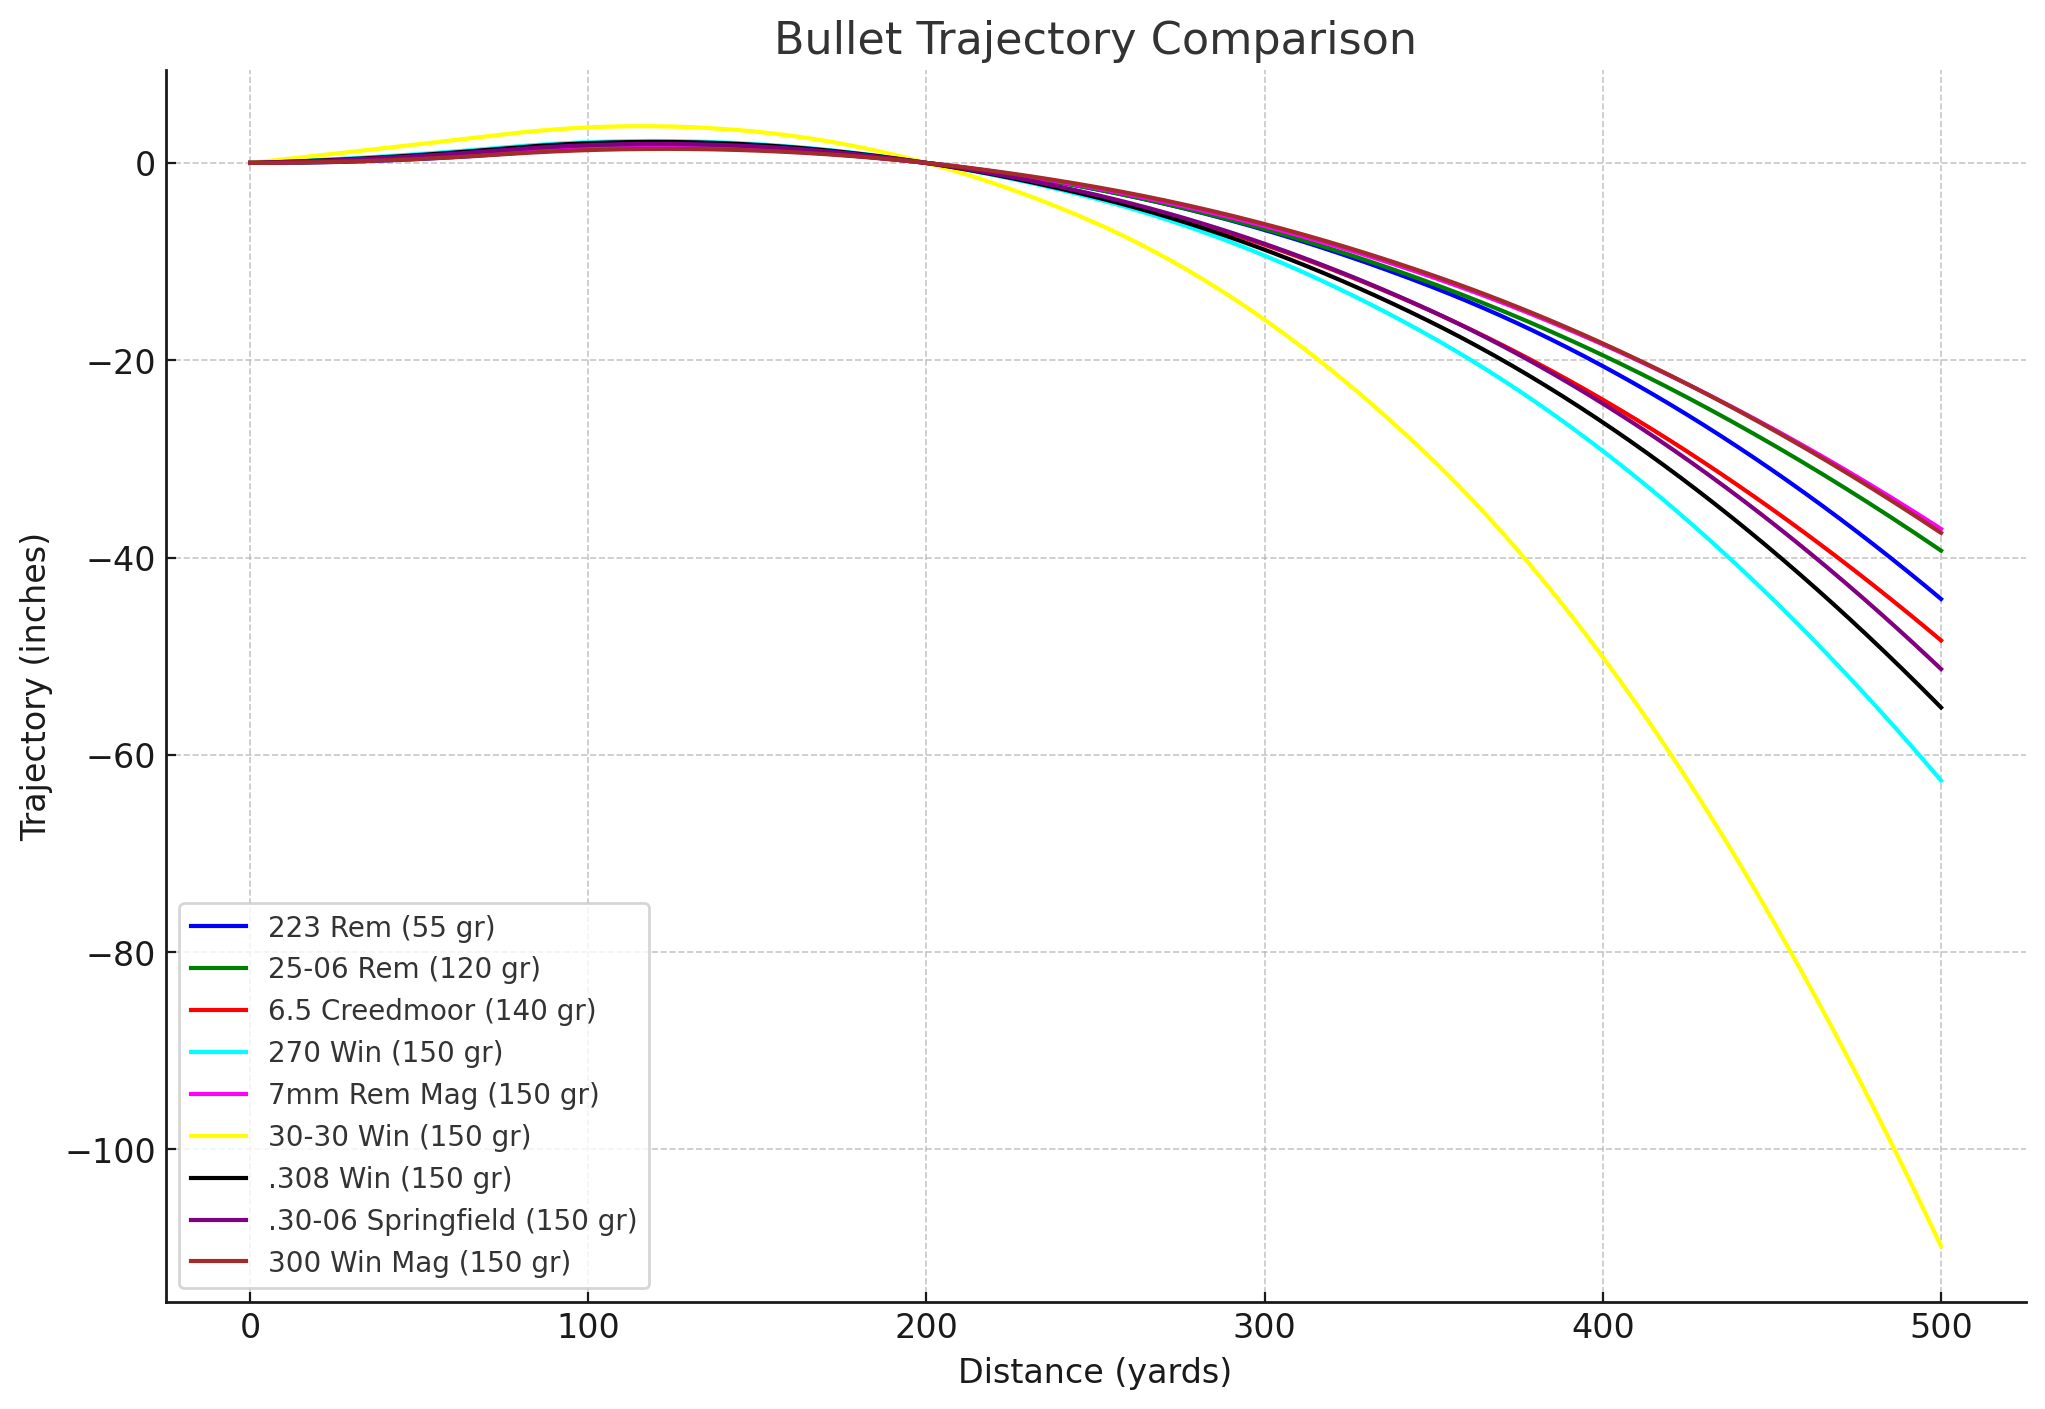 Bullet Trajectory Comparison of the 30-06 Springfield,308 Win, 270 Win, 6.5 Creedmoor, 300 Win Mag, 7mm Rem Mag, 223 Rem, 30-30 Win, and 25-06 Rem